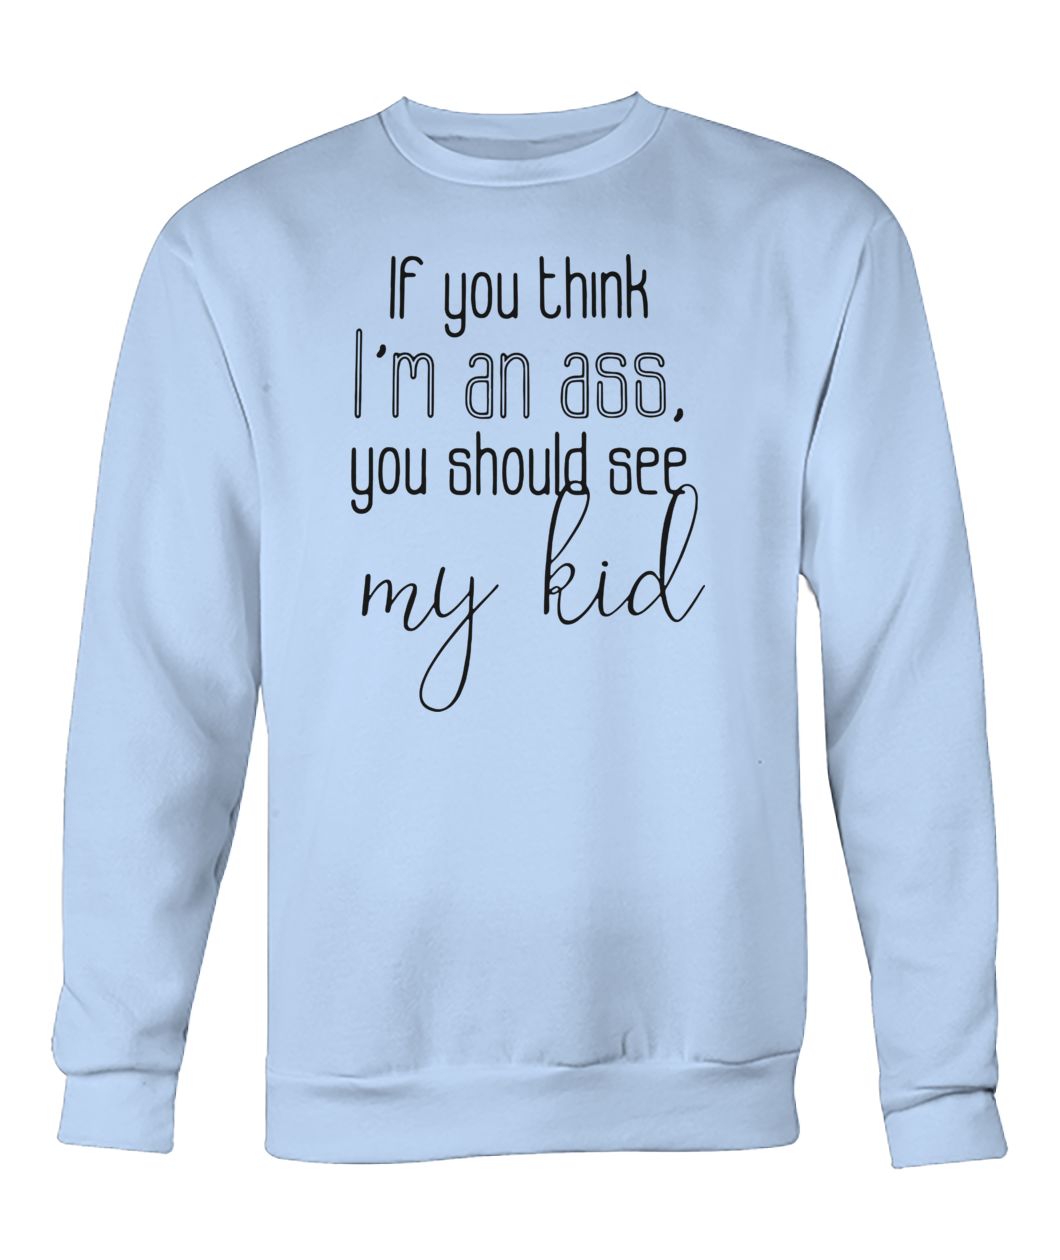 If you think I'm an ass you should see my kid crew neck sweatshirt